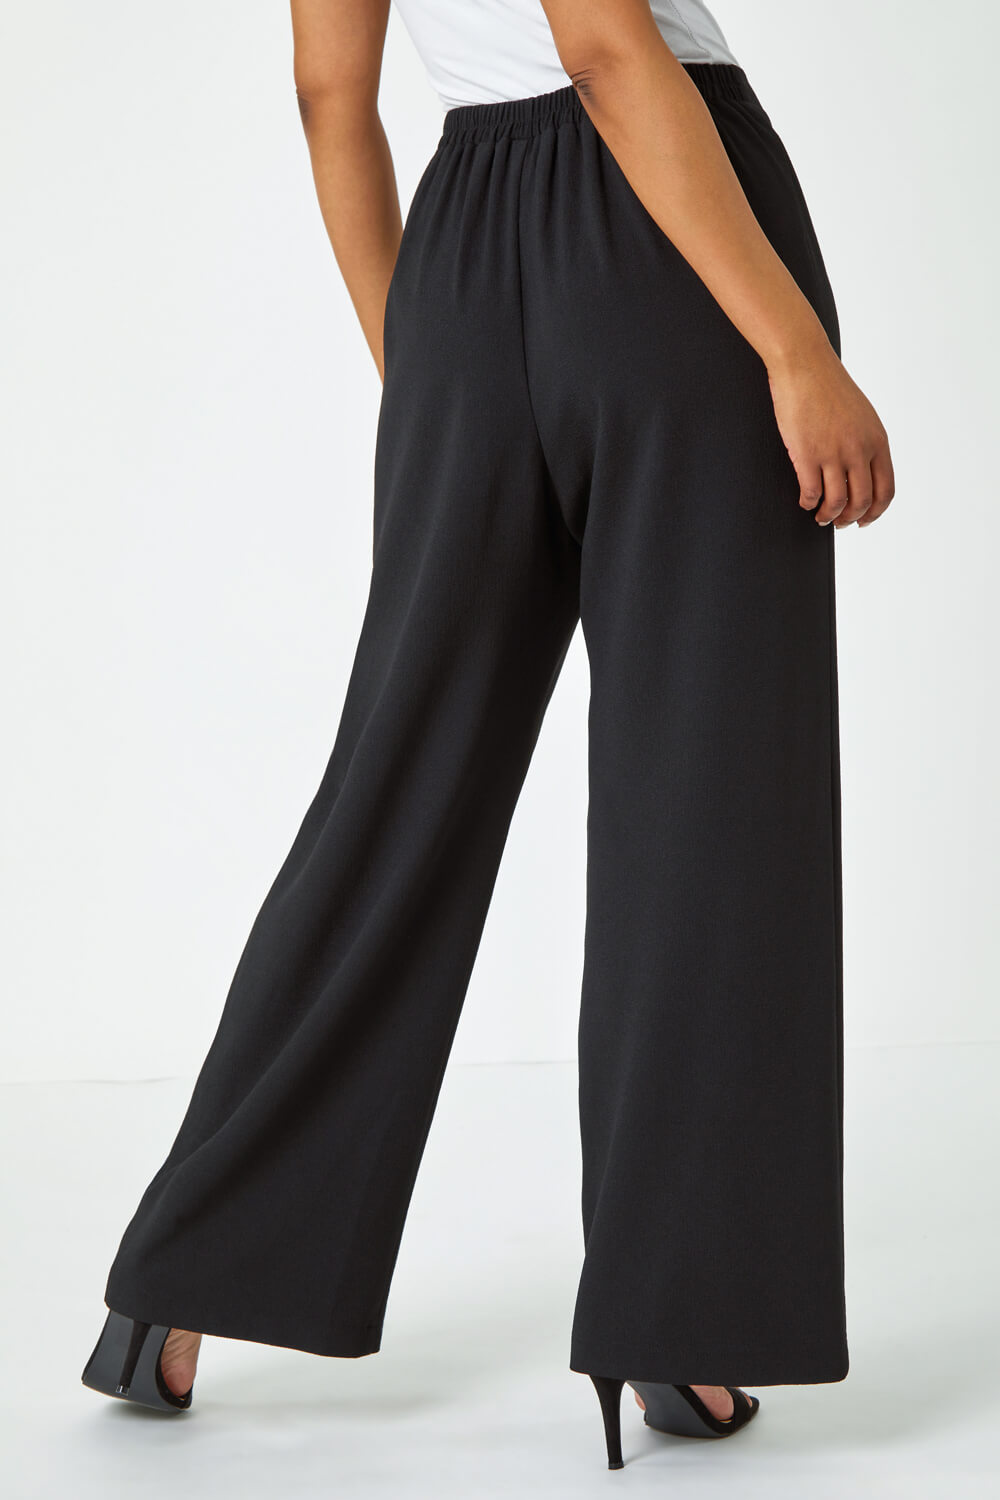 Black Petite Wide Leg Stretch Trousers, Image 3 of 5